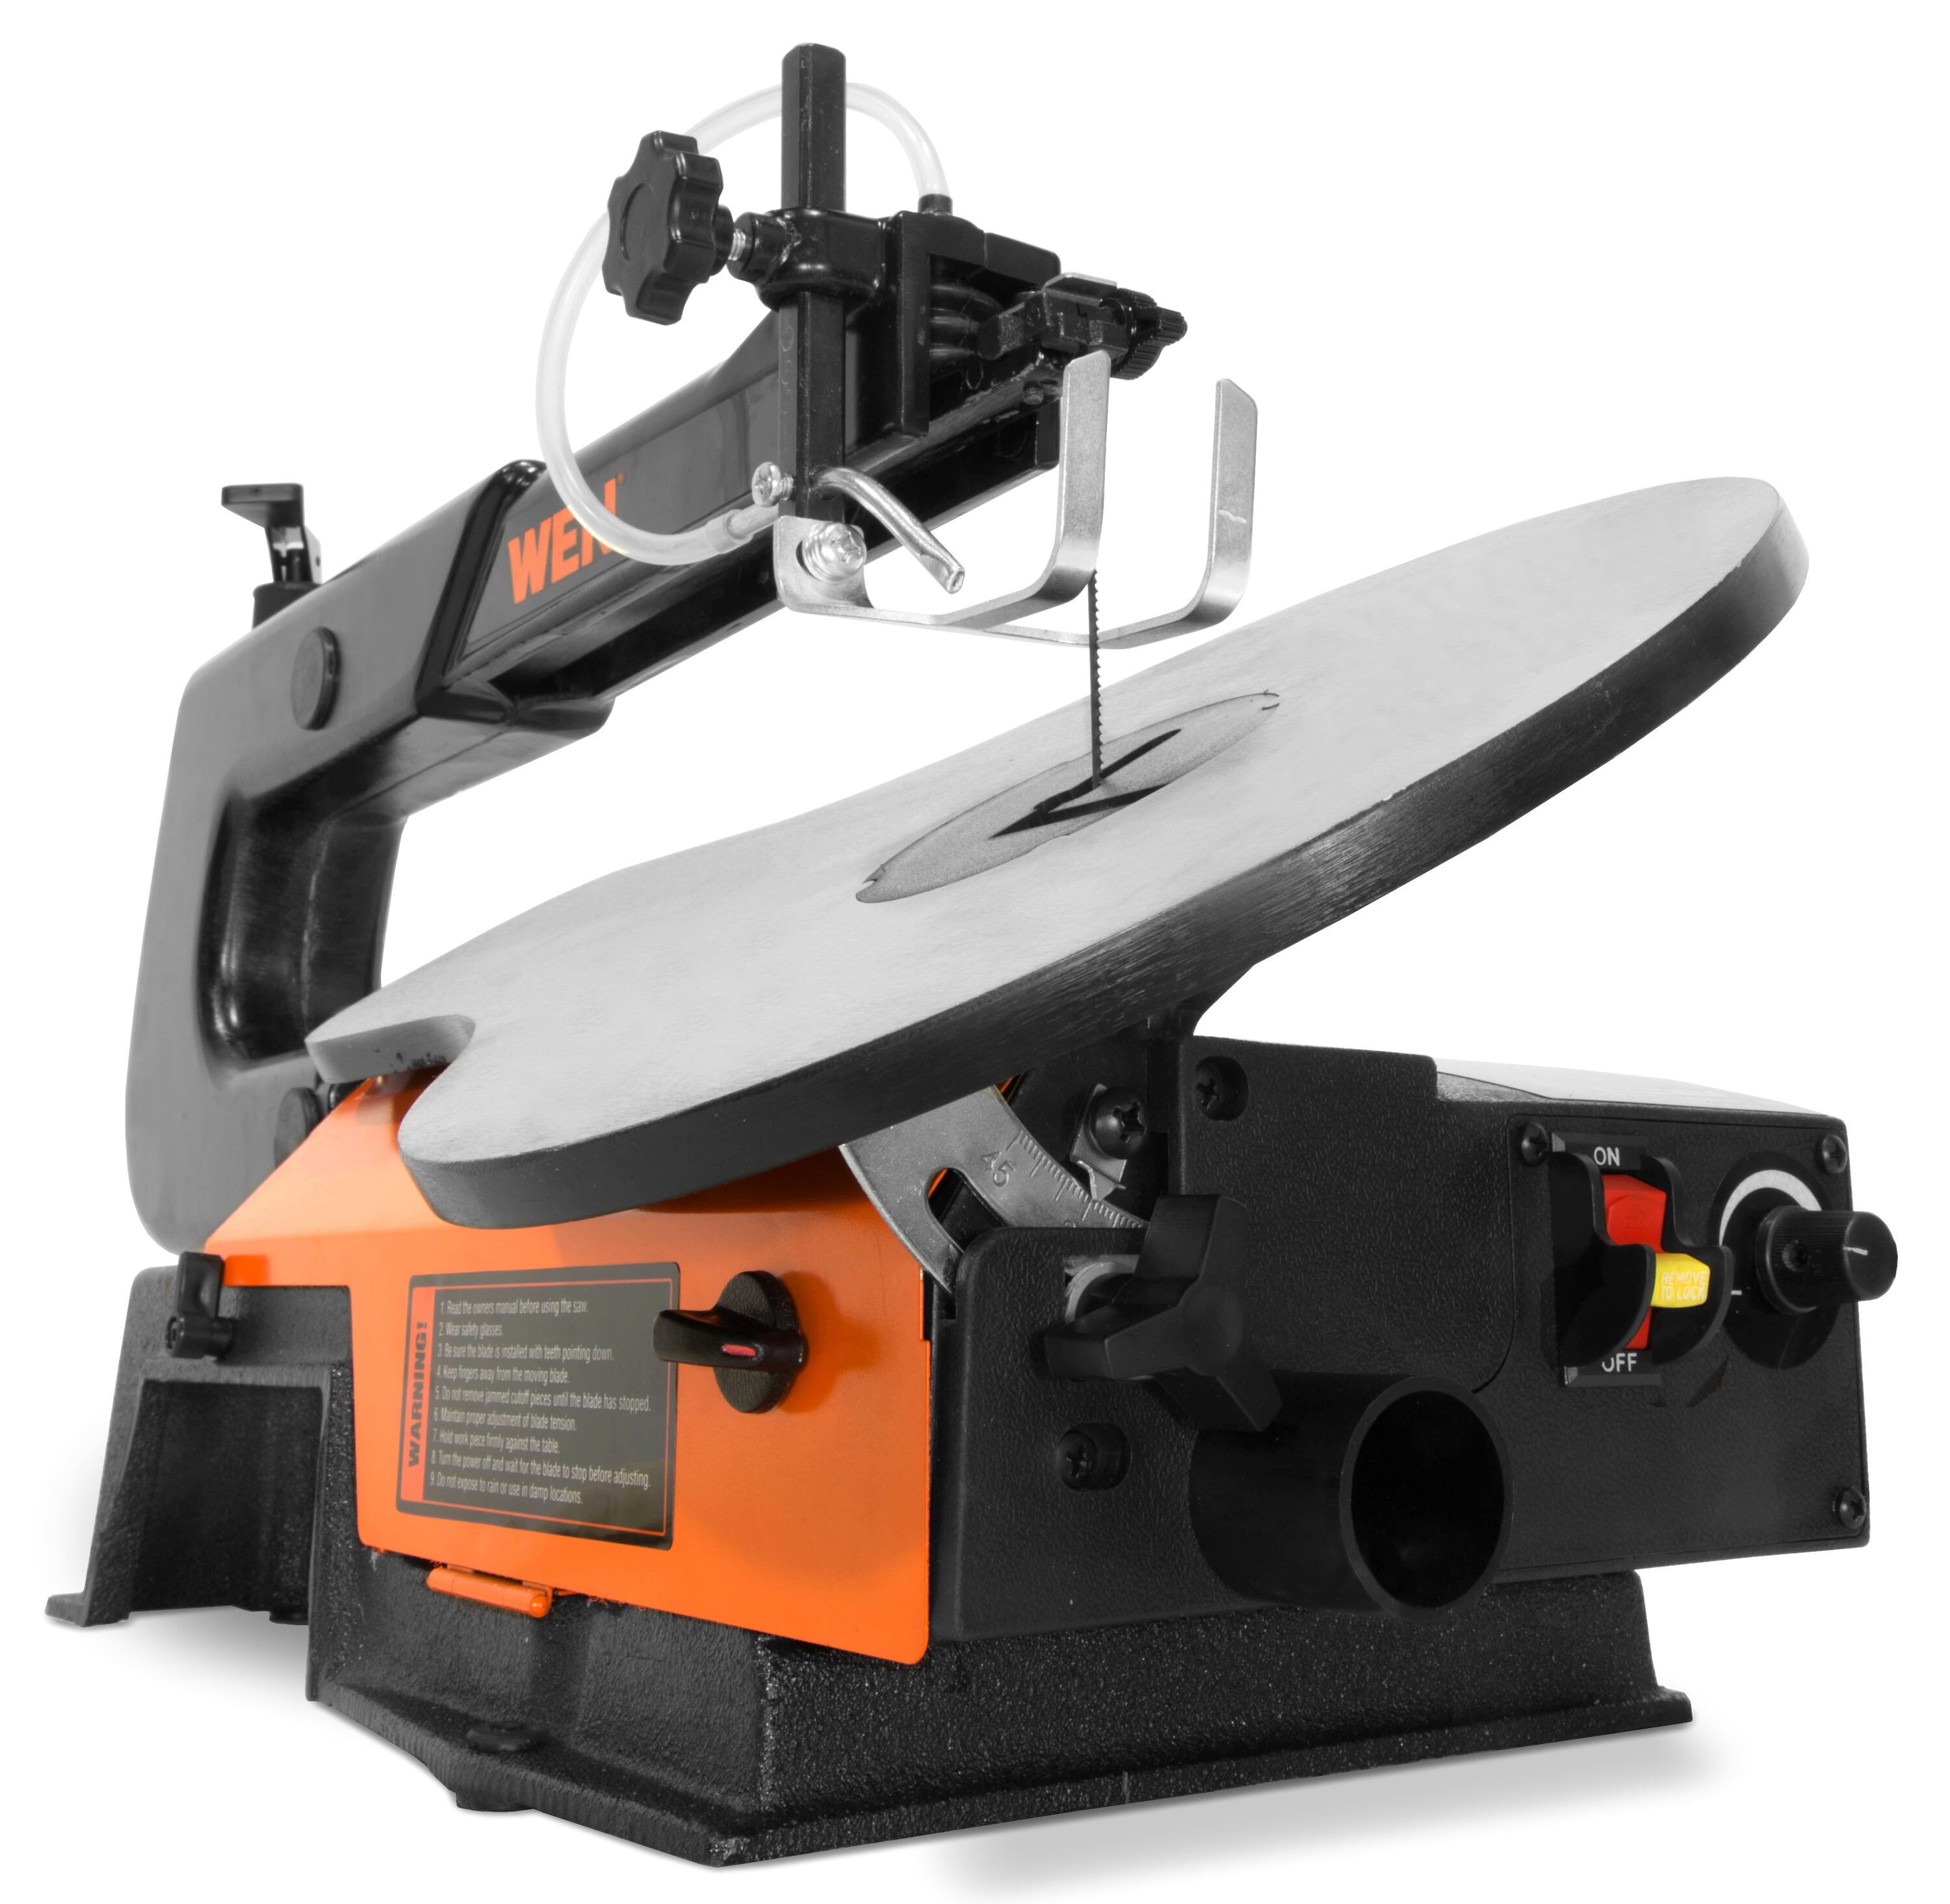 WEN 16-in 1.2-Amp Variable Speed Corded Scroll Saw